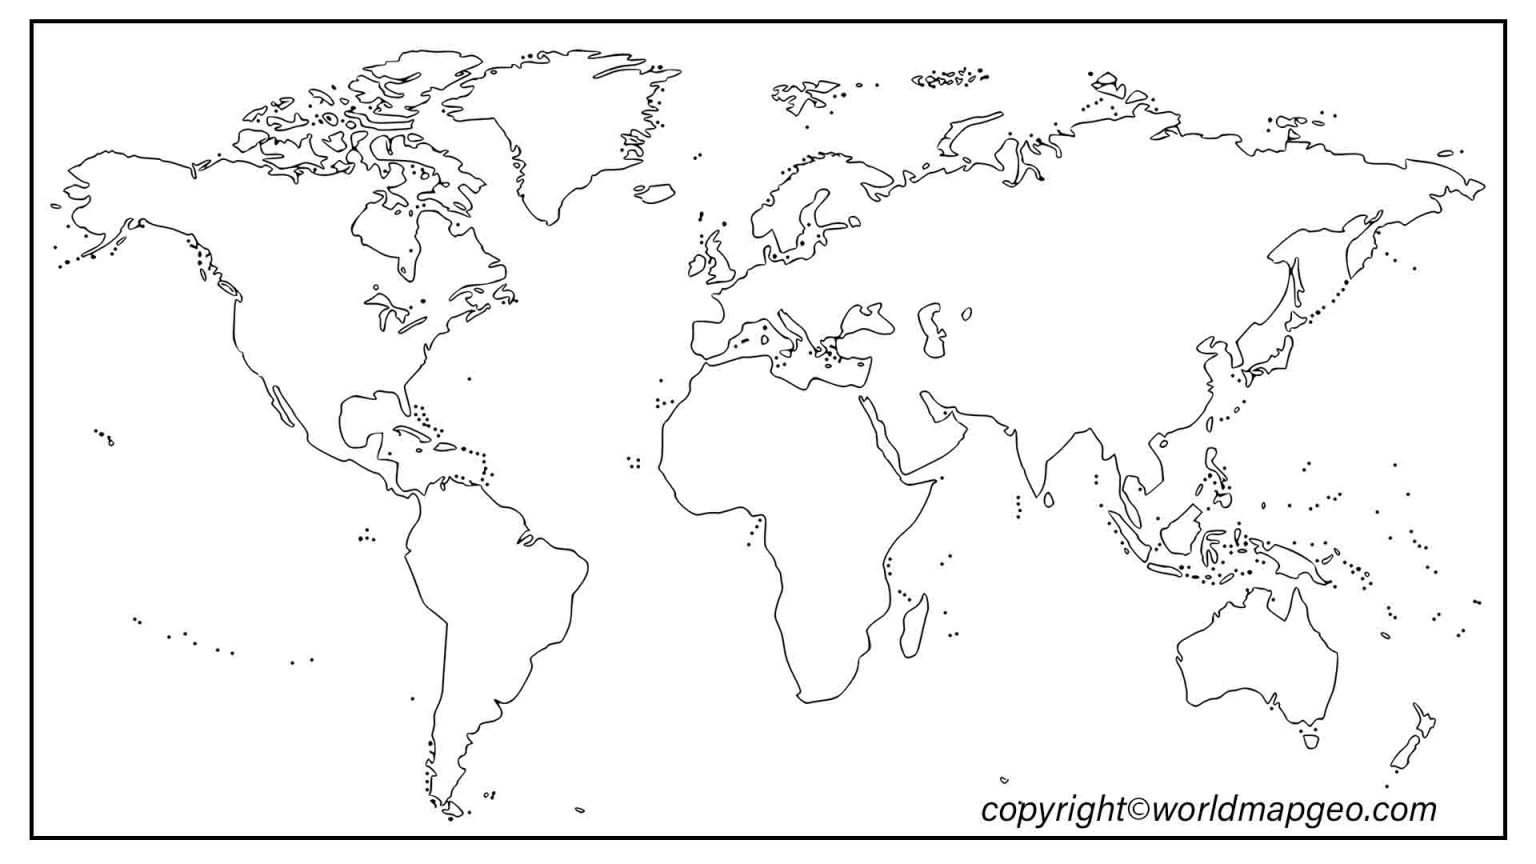 Blank World Map Outline with Printable Worksheet in PDF